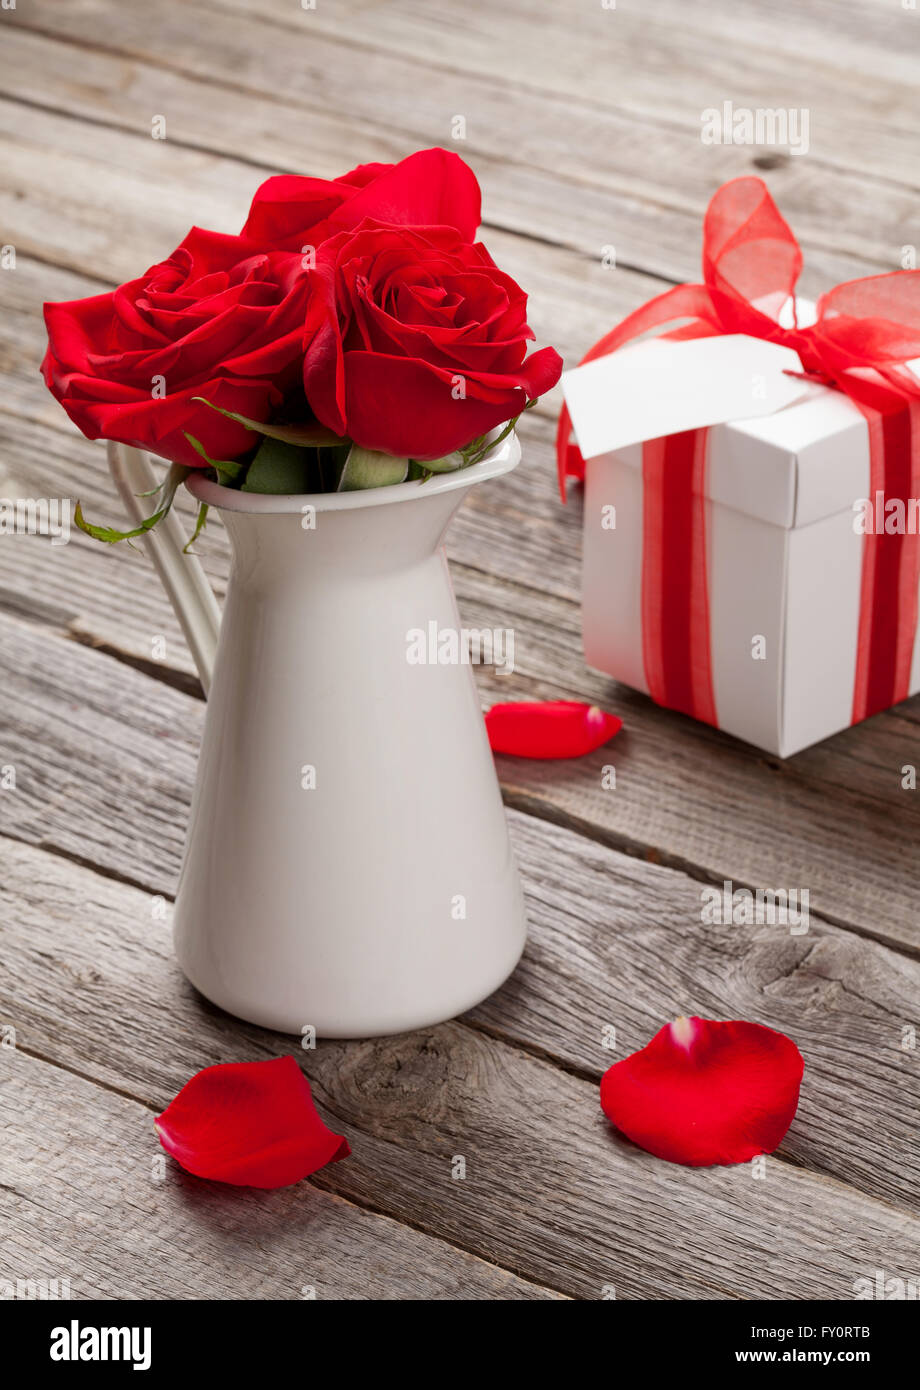 Red rose flowers in pitcher and Valentines day gift box on wooden table Stock Photo